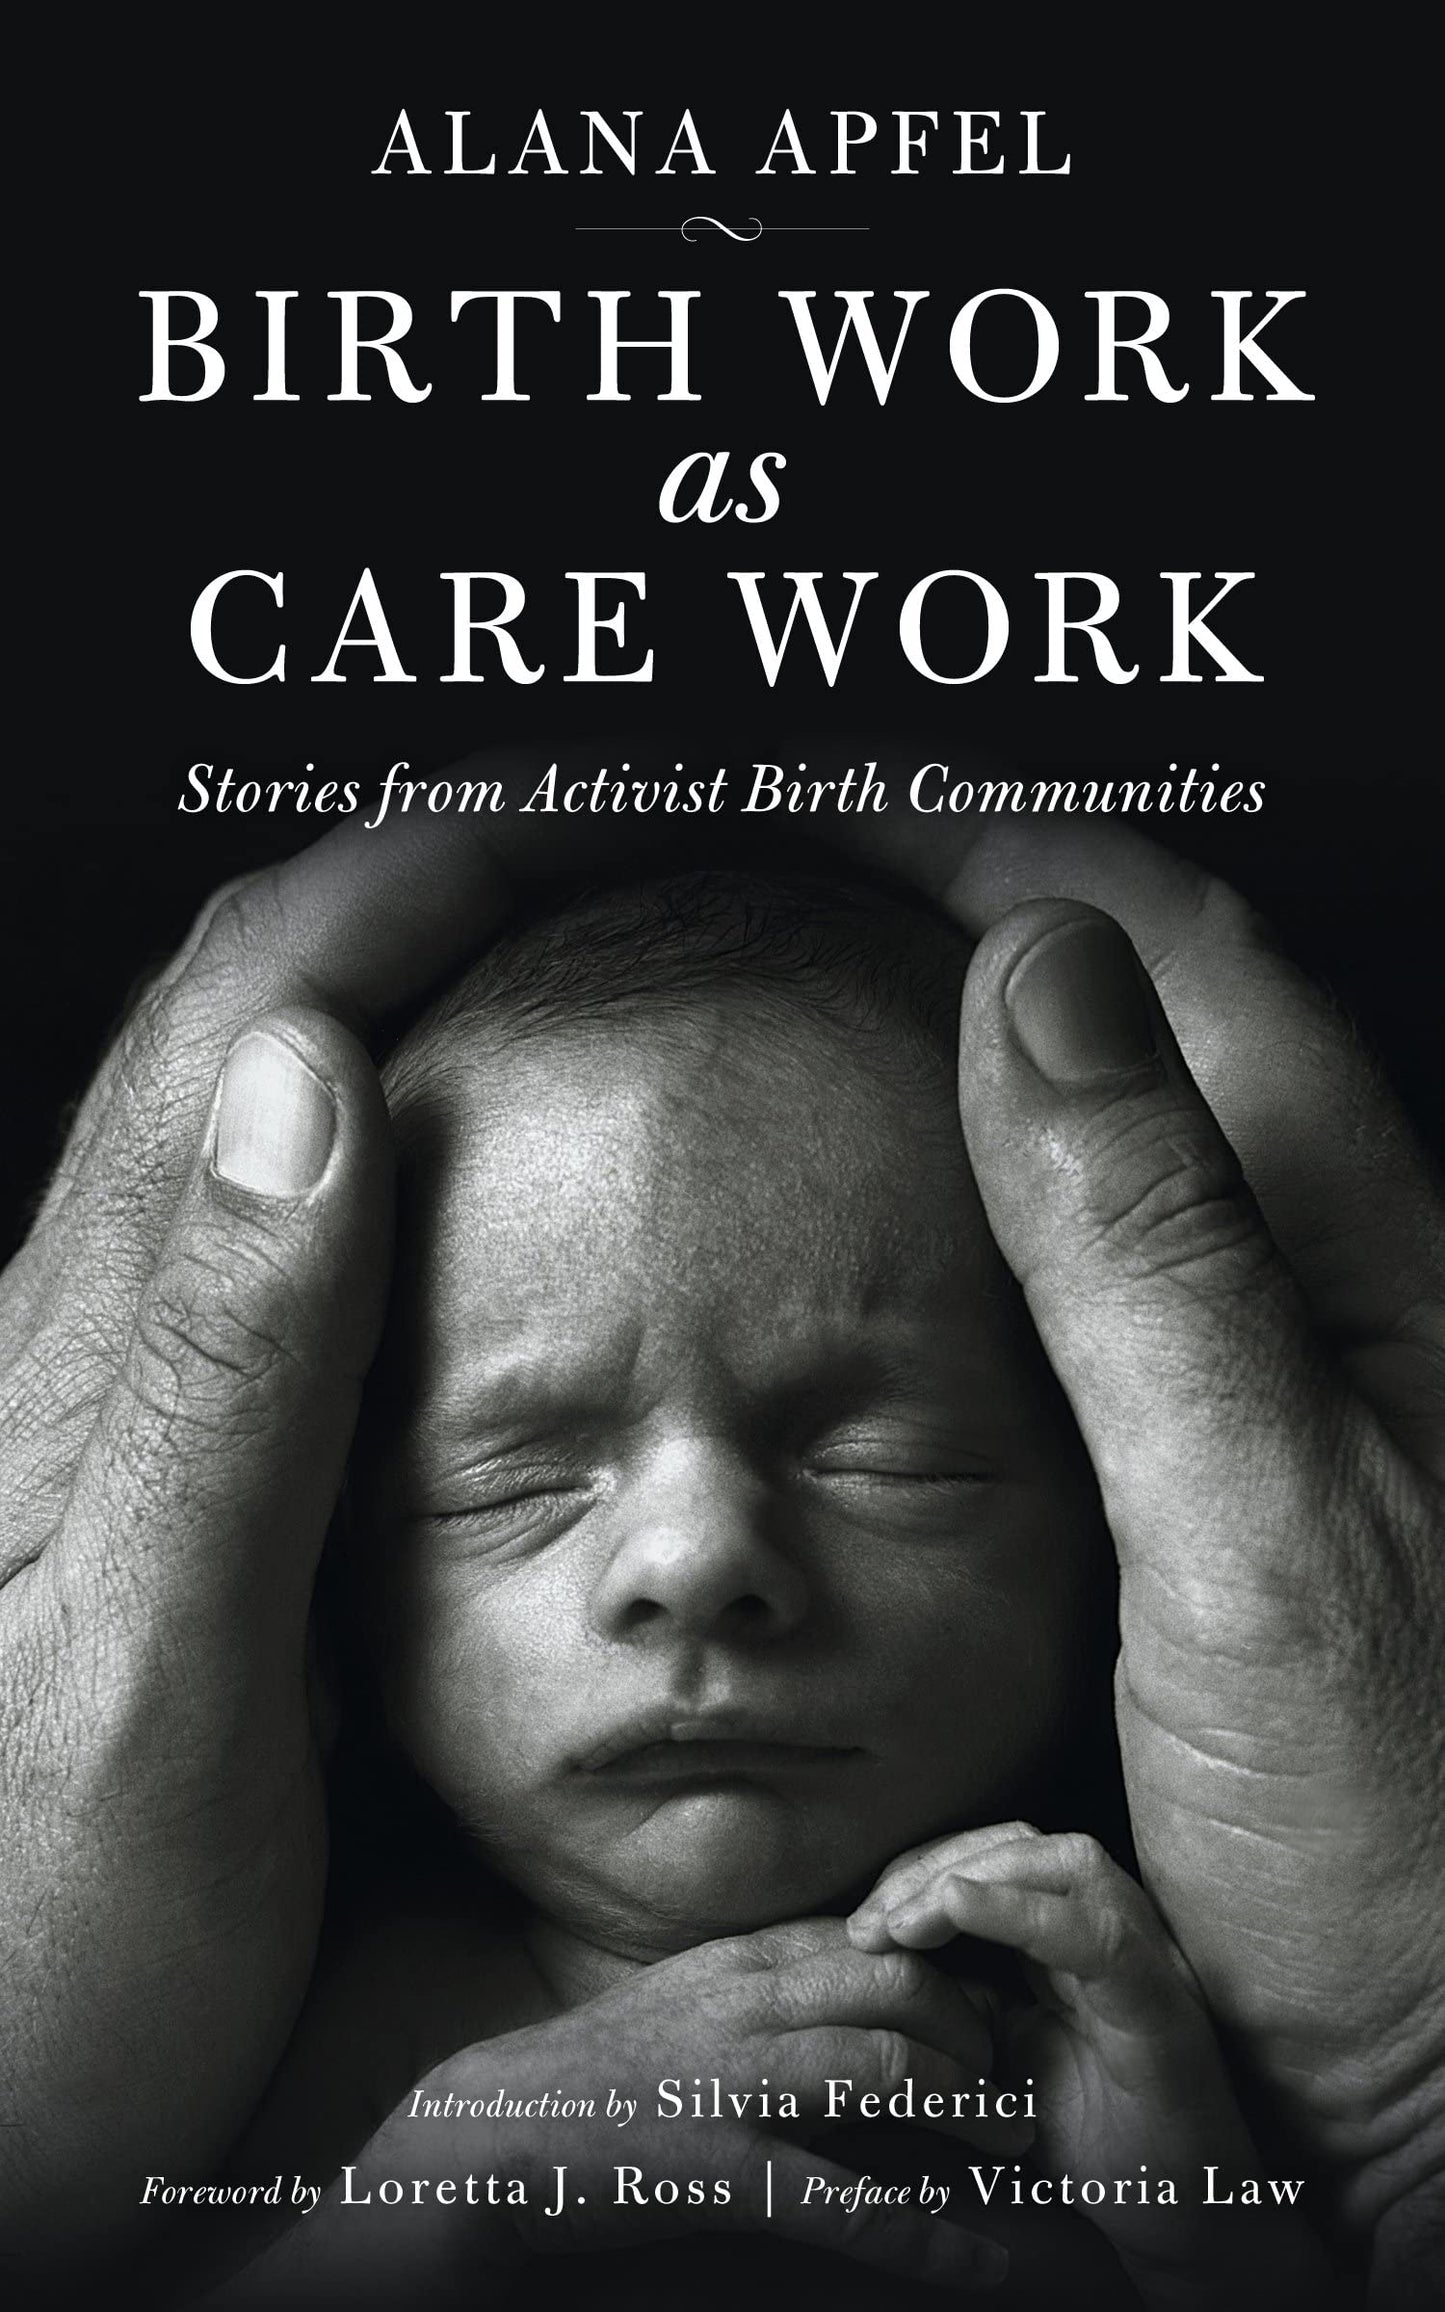 Birth Work as Care Work, by Alana Apfel